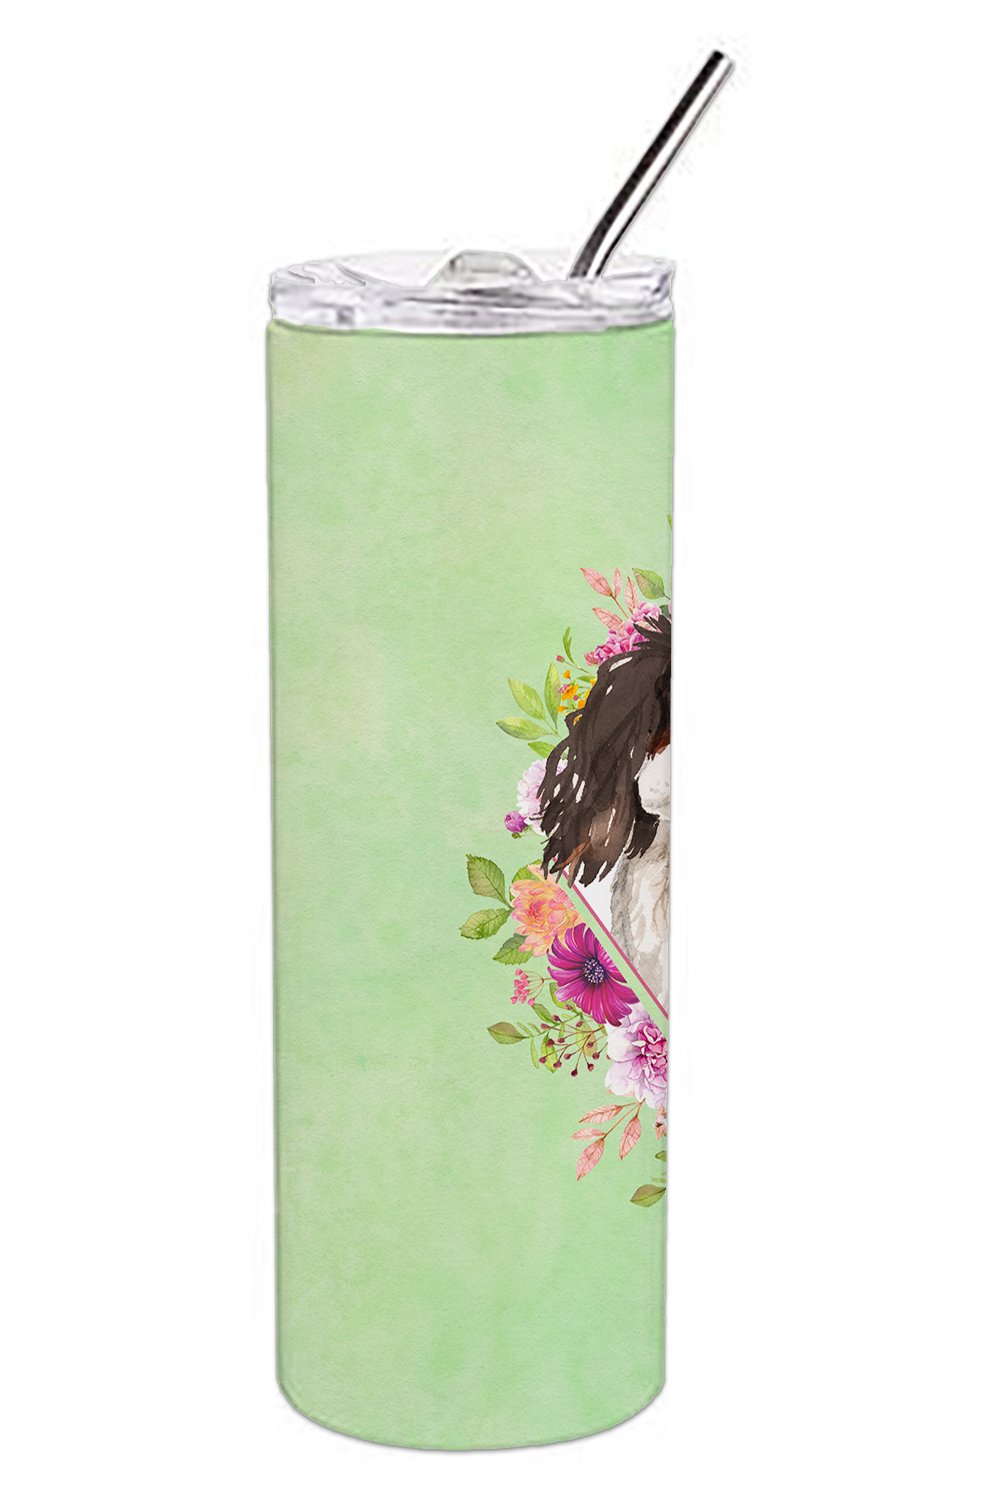 Tricolor Cavalier Spaniel Green Flowers Double Walled Stainless Steel 20 oz Skinny Tumbler CK4366TBL20 by Caroline's Treasures